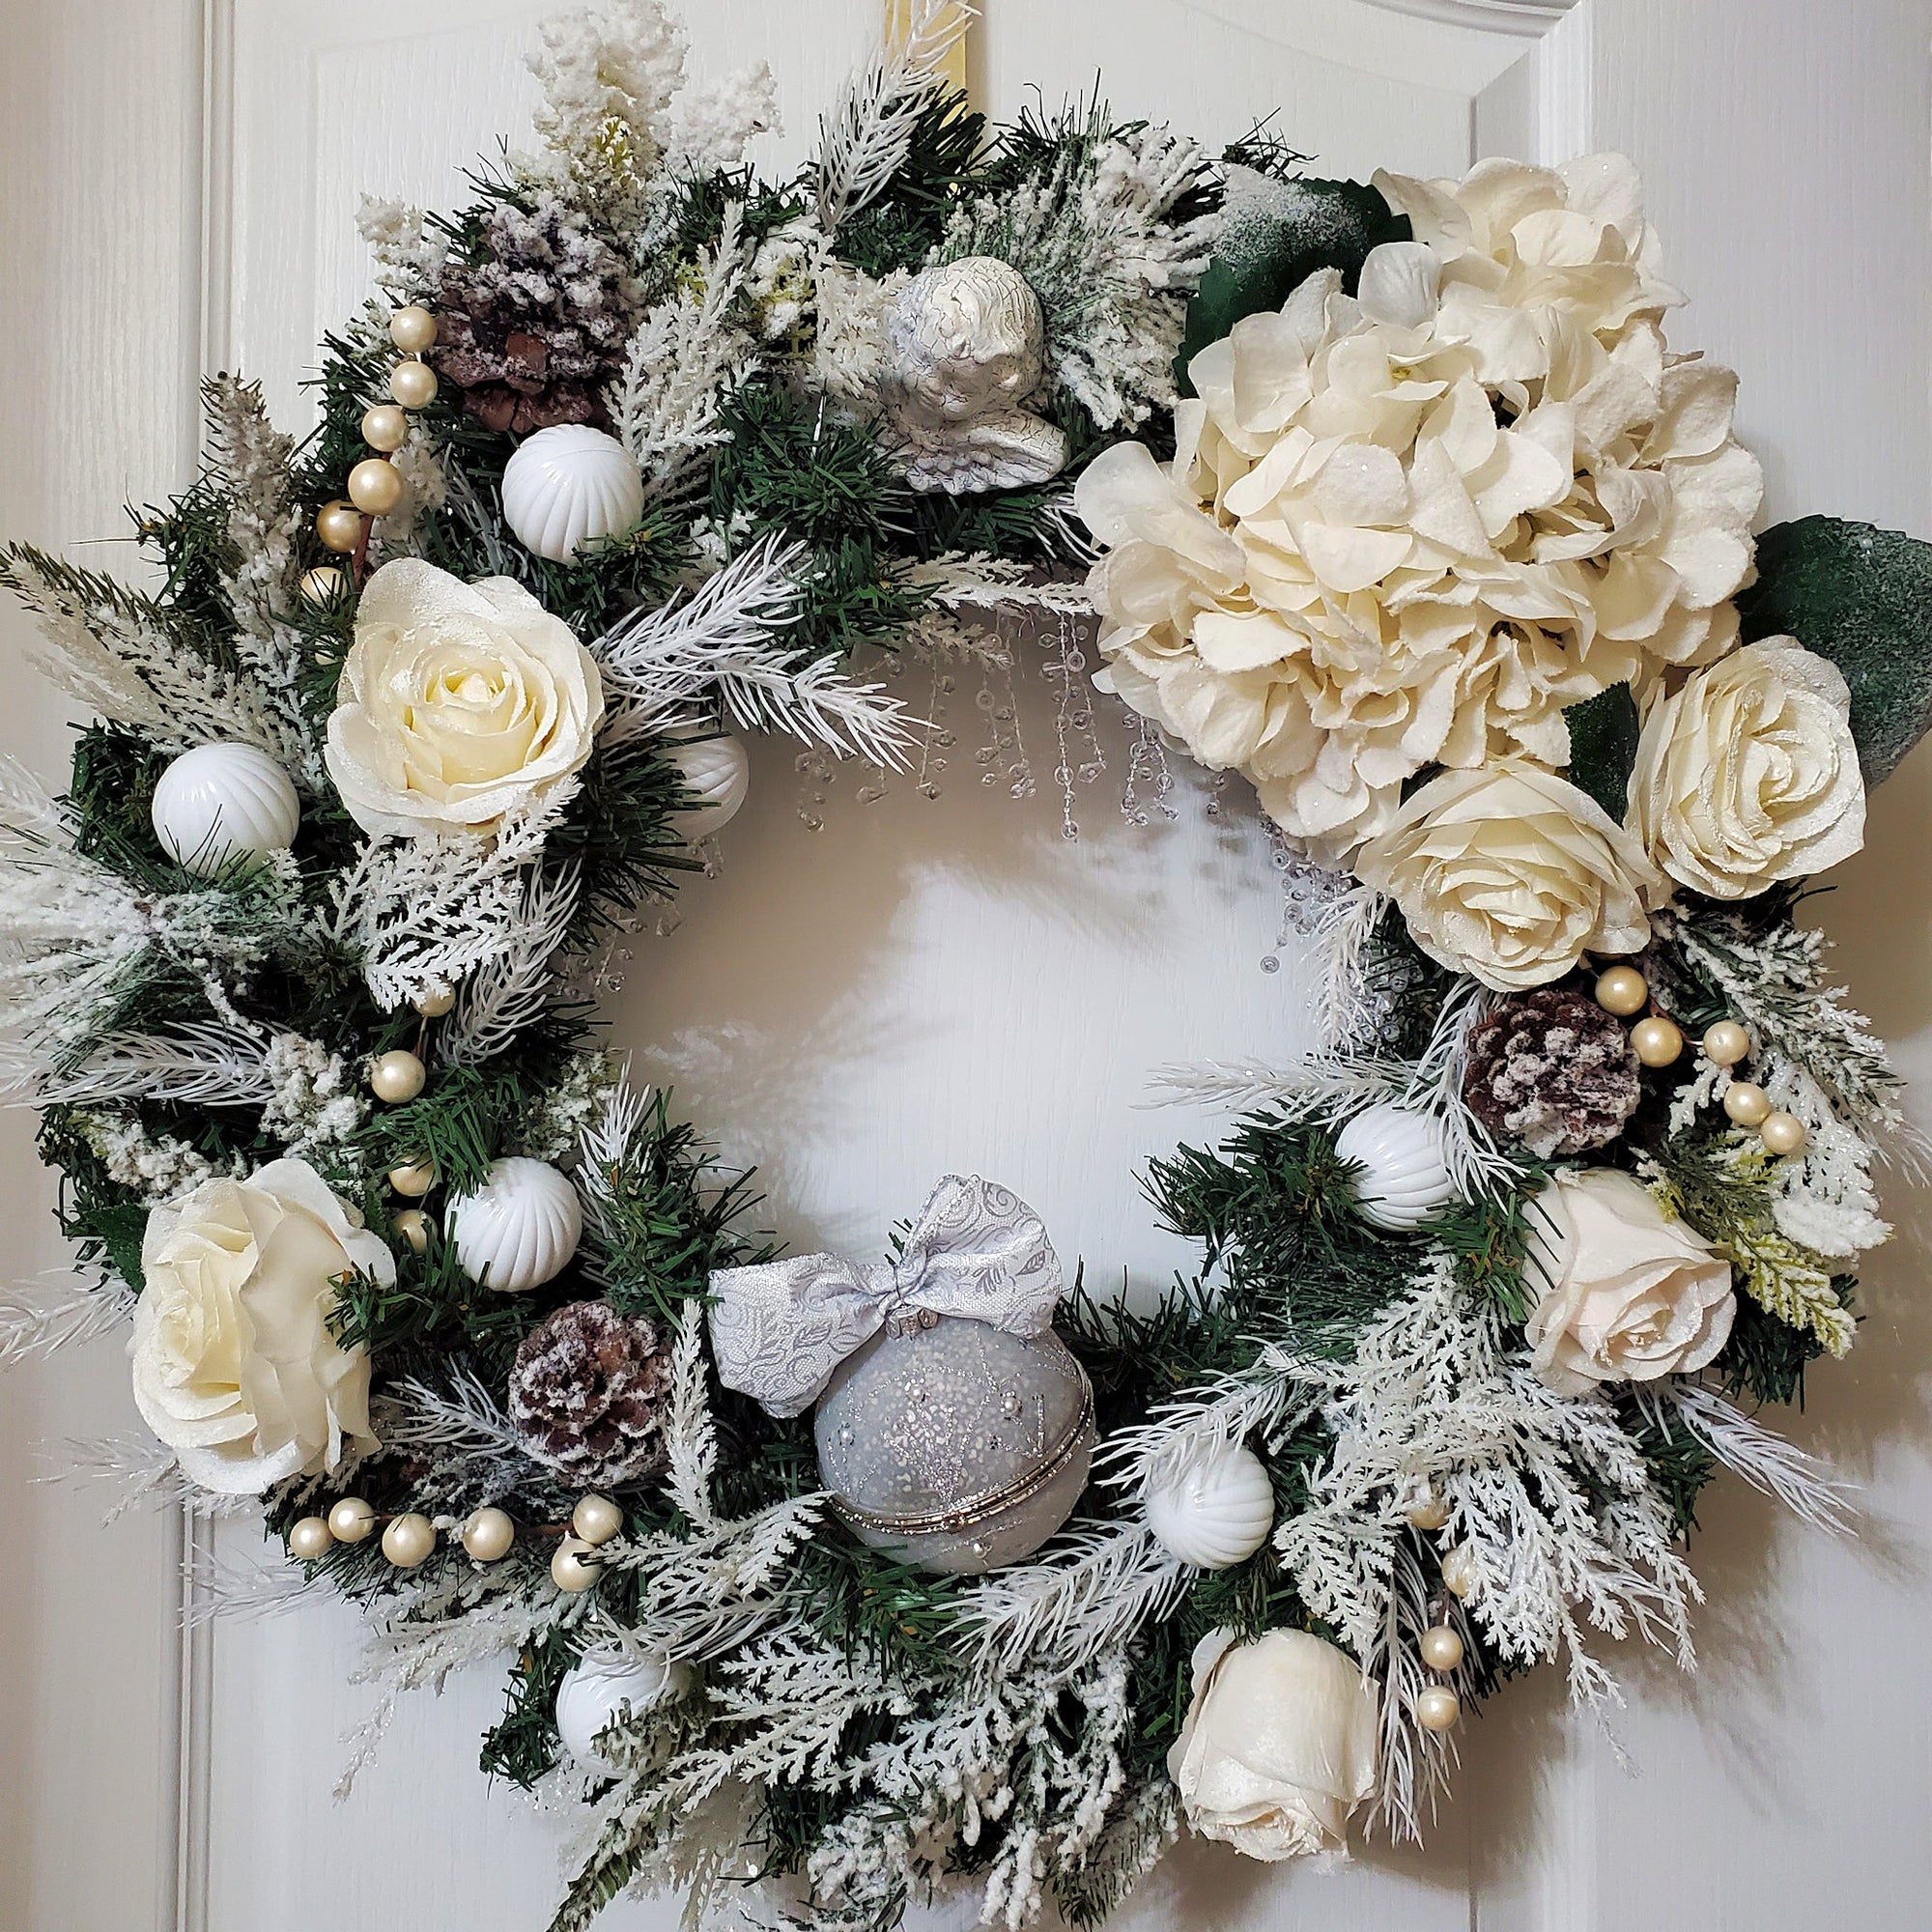 Floral Christmas Wreath with Snow Dusted Roses and Hydrangea